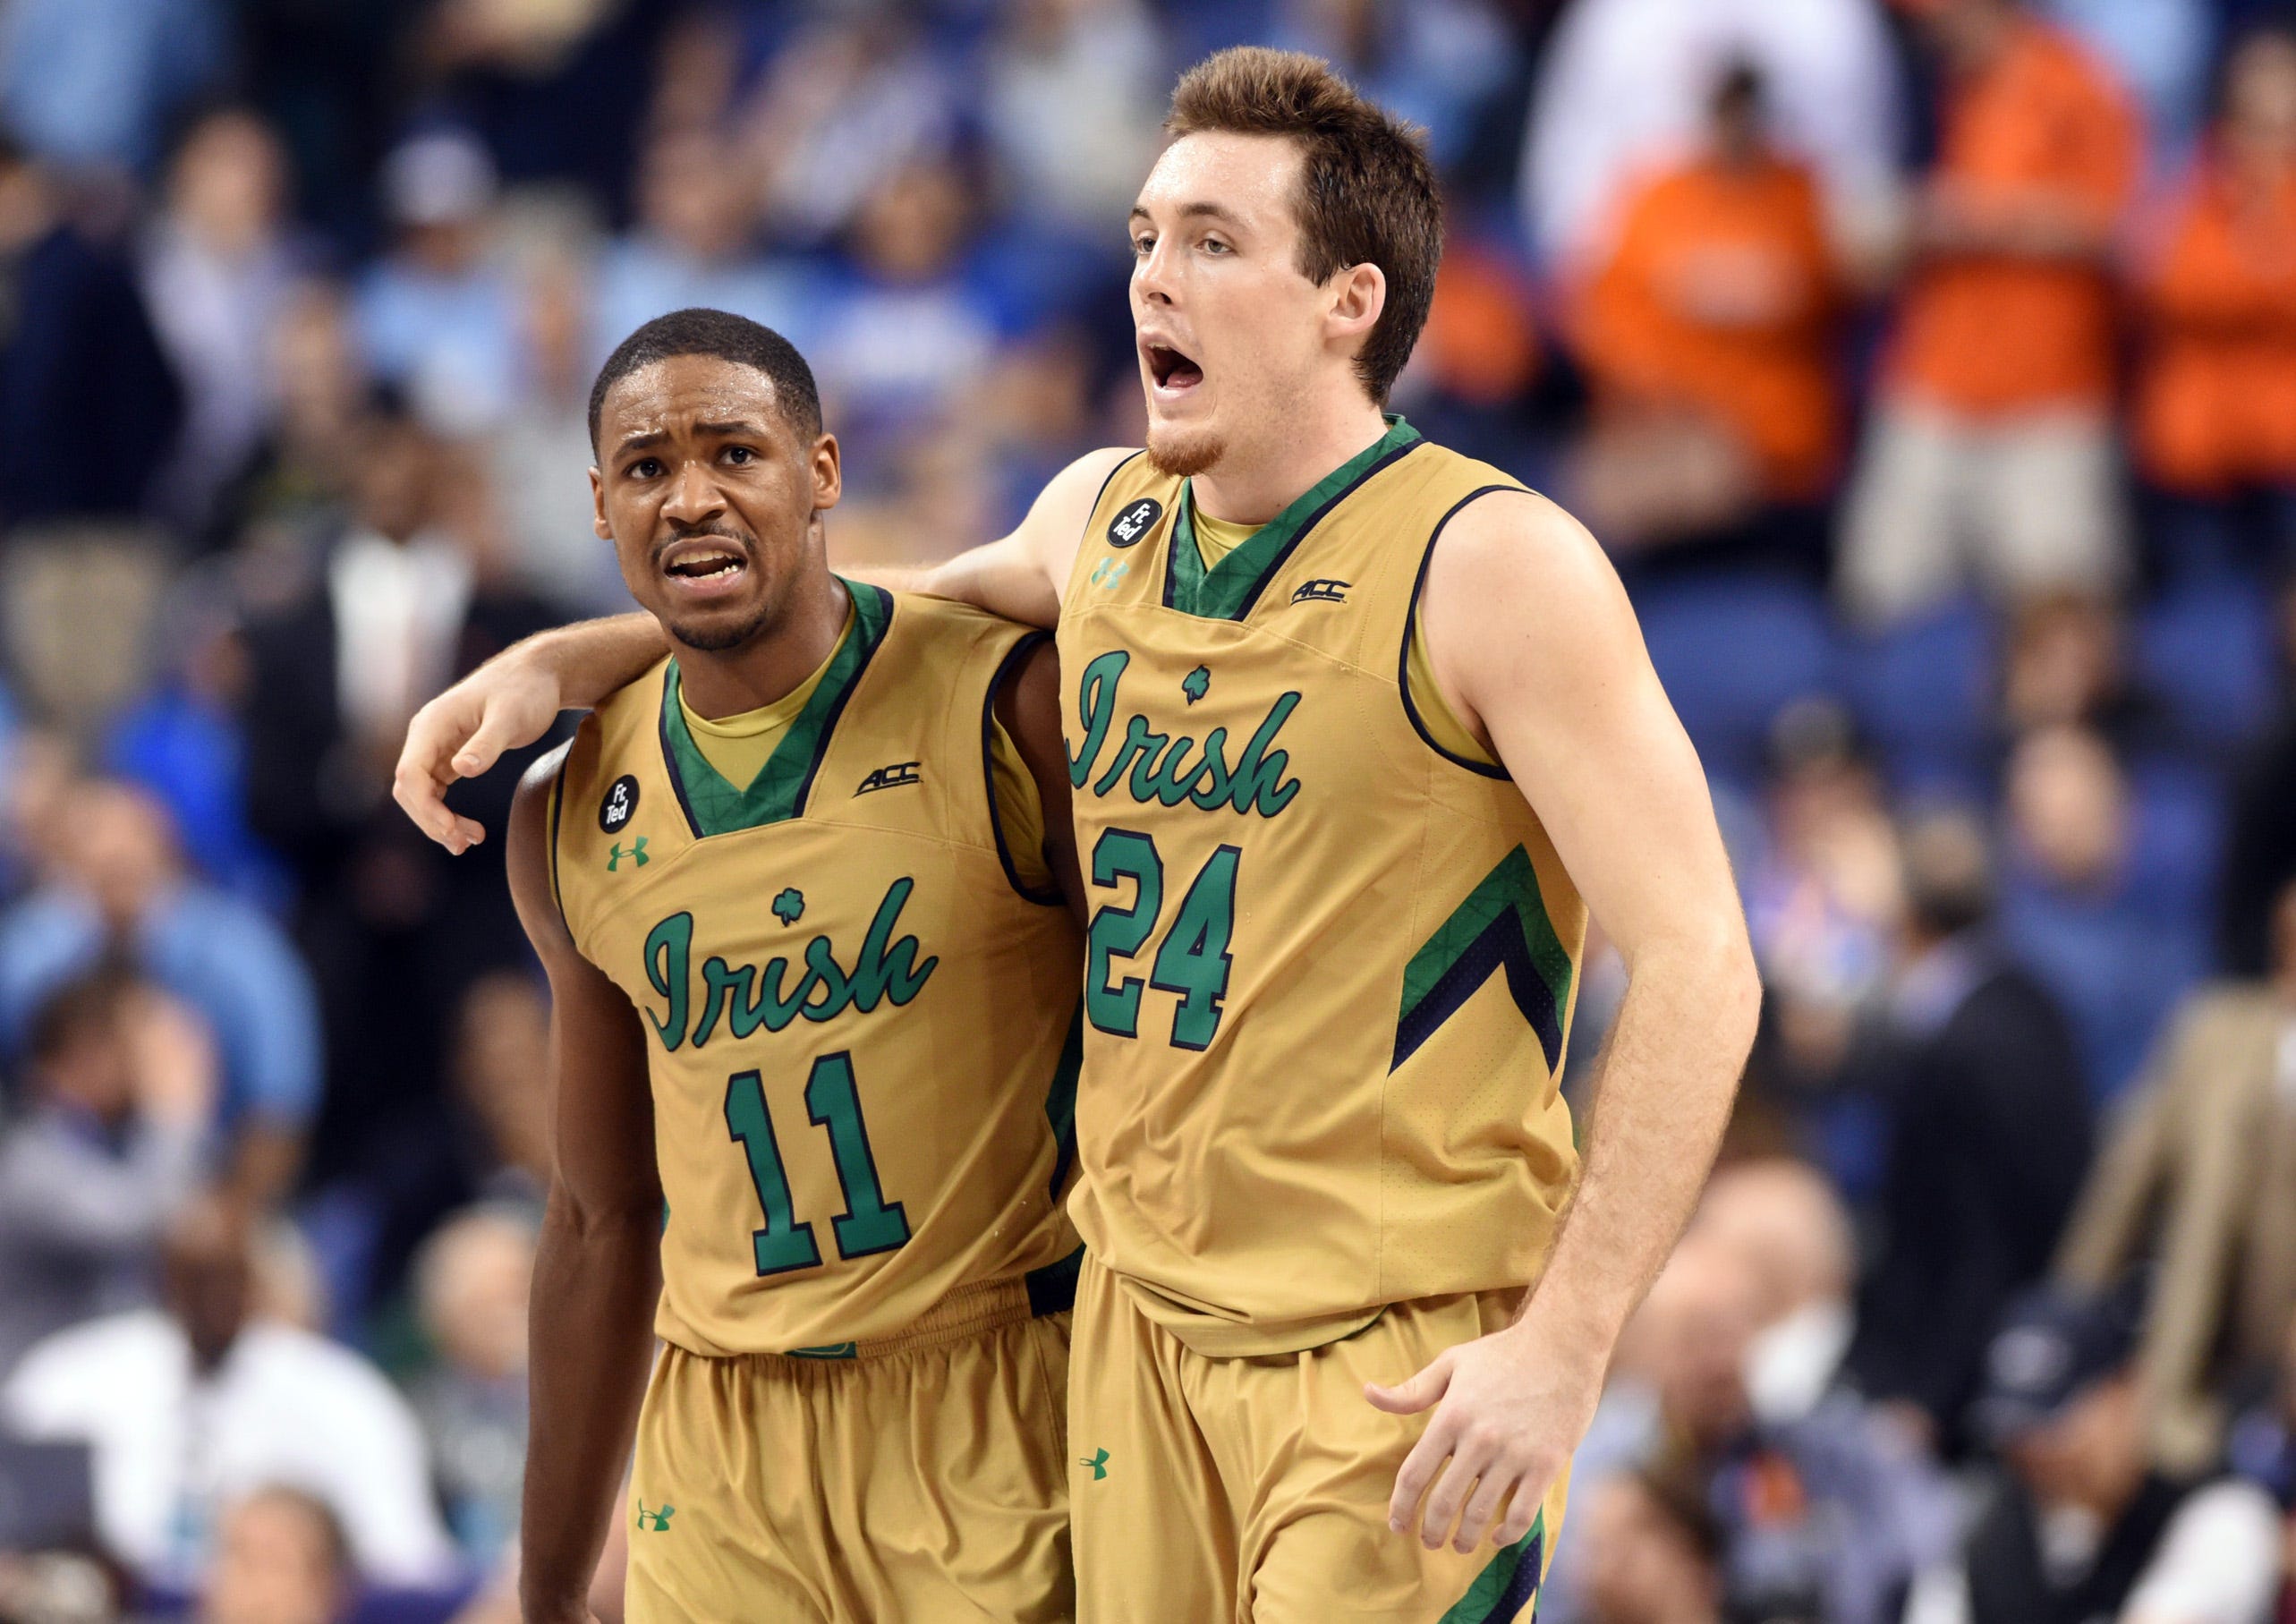 pat connaughton notre dame jersey